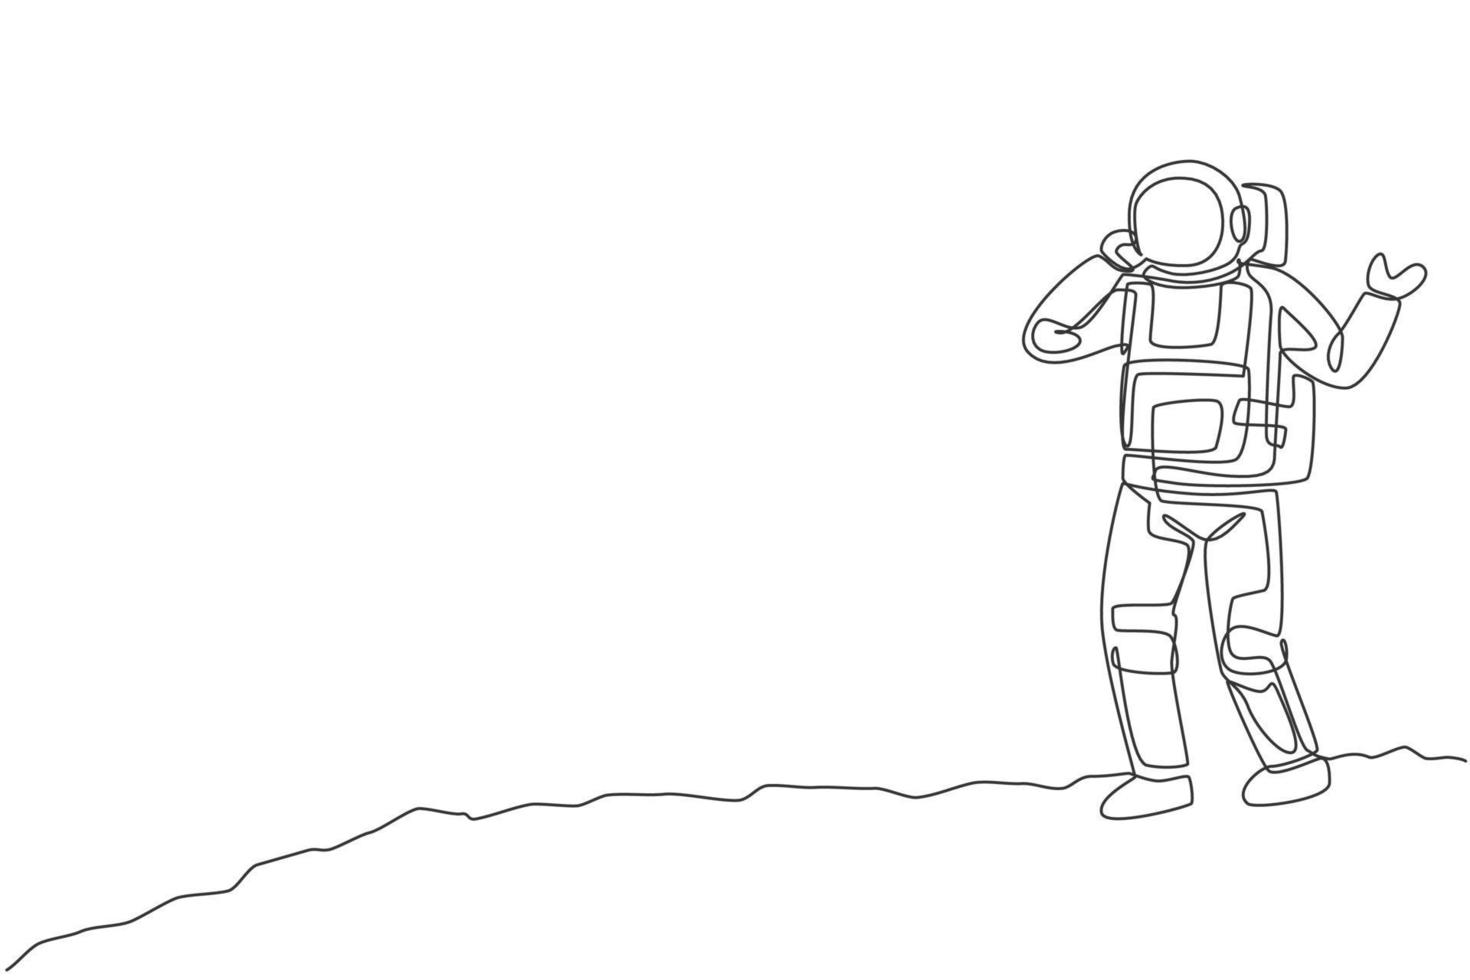 One single line drawing of cosmonaut make a call to partner using smartphone in moon surface vector illustration. Astronaut business office with outer space concept. Modern continuous line draw design